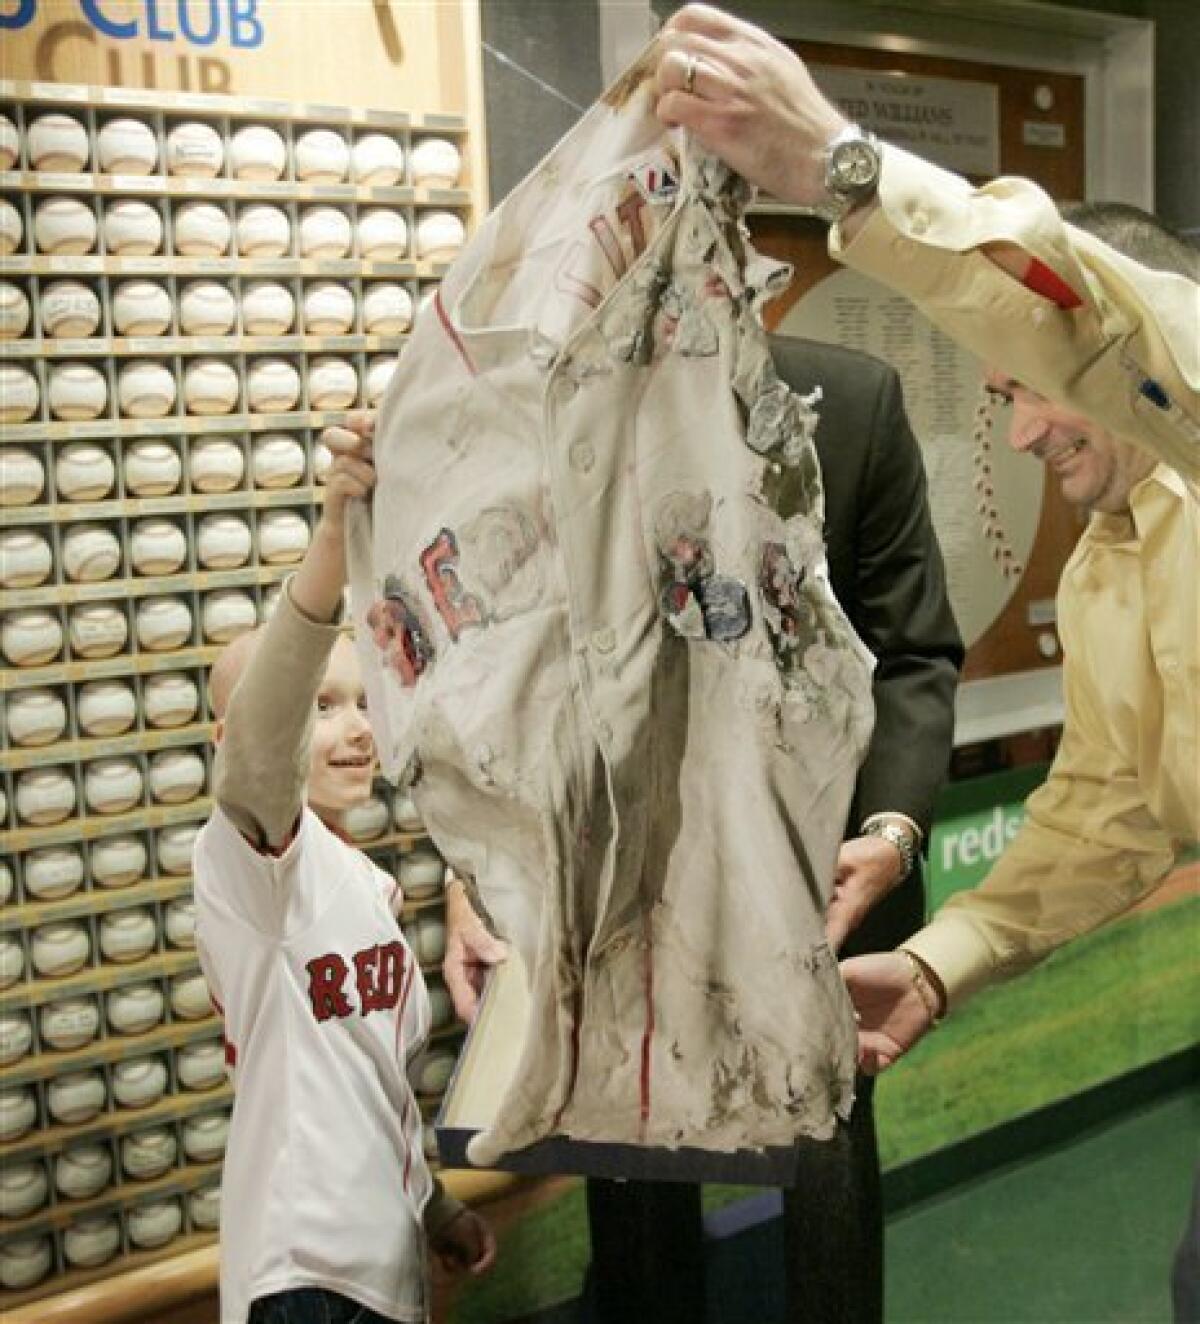 Red Sox 'curse' jersey fetches $175,100 - The San Diego Union-Tribune